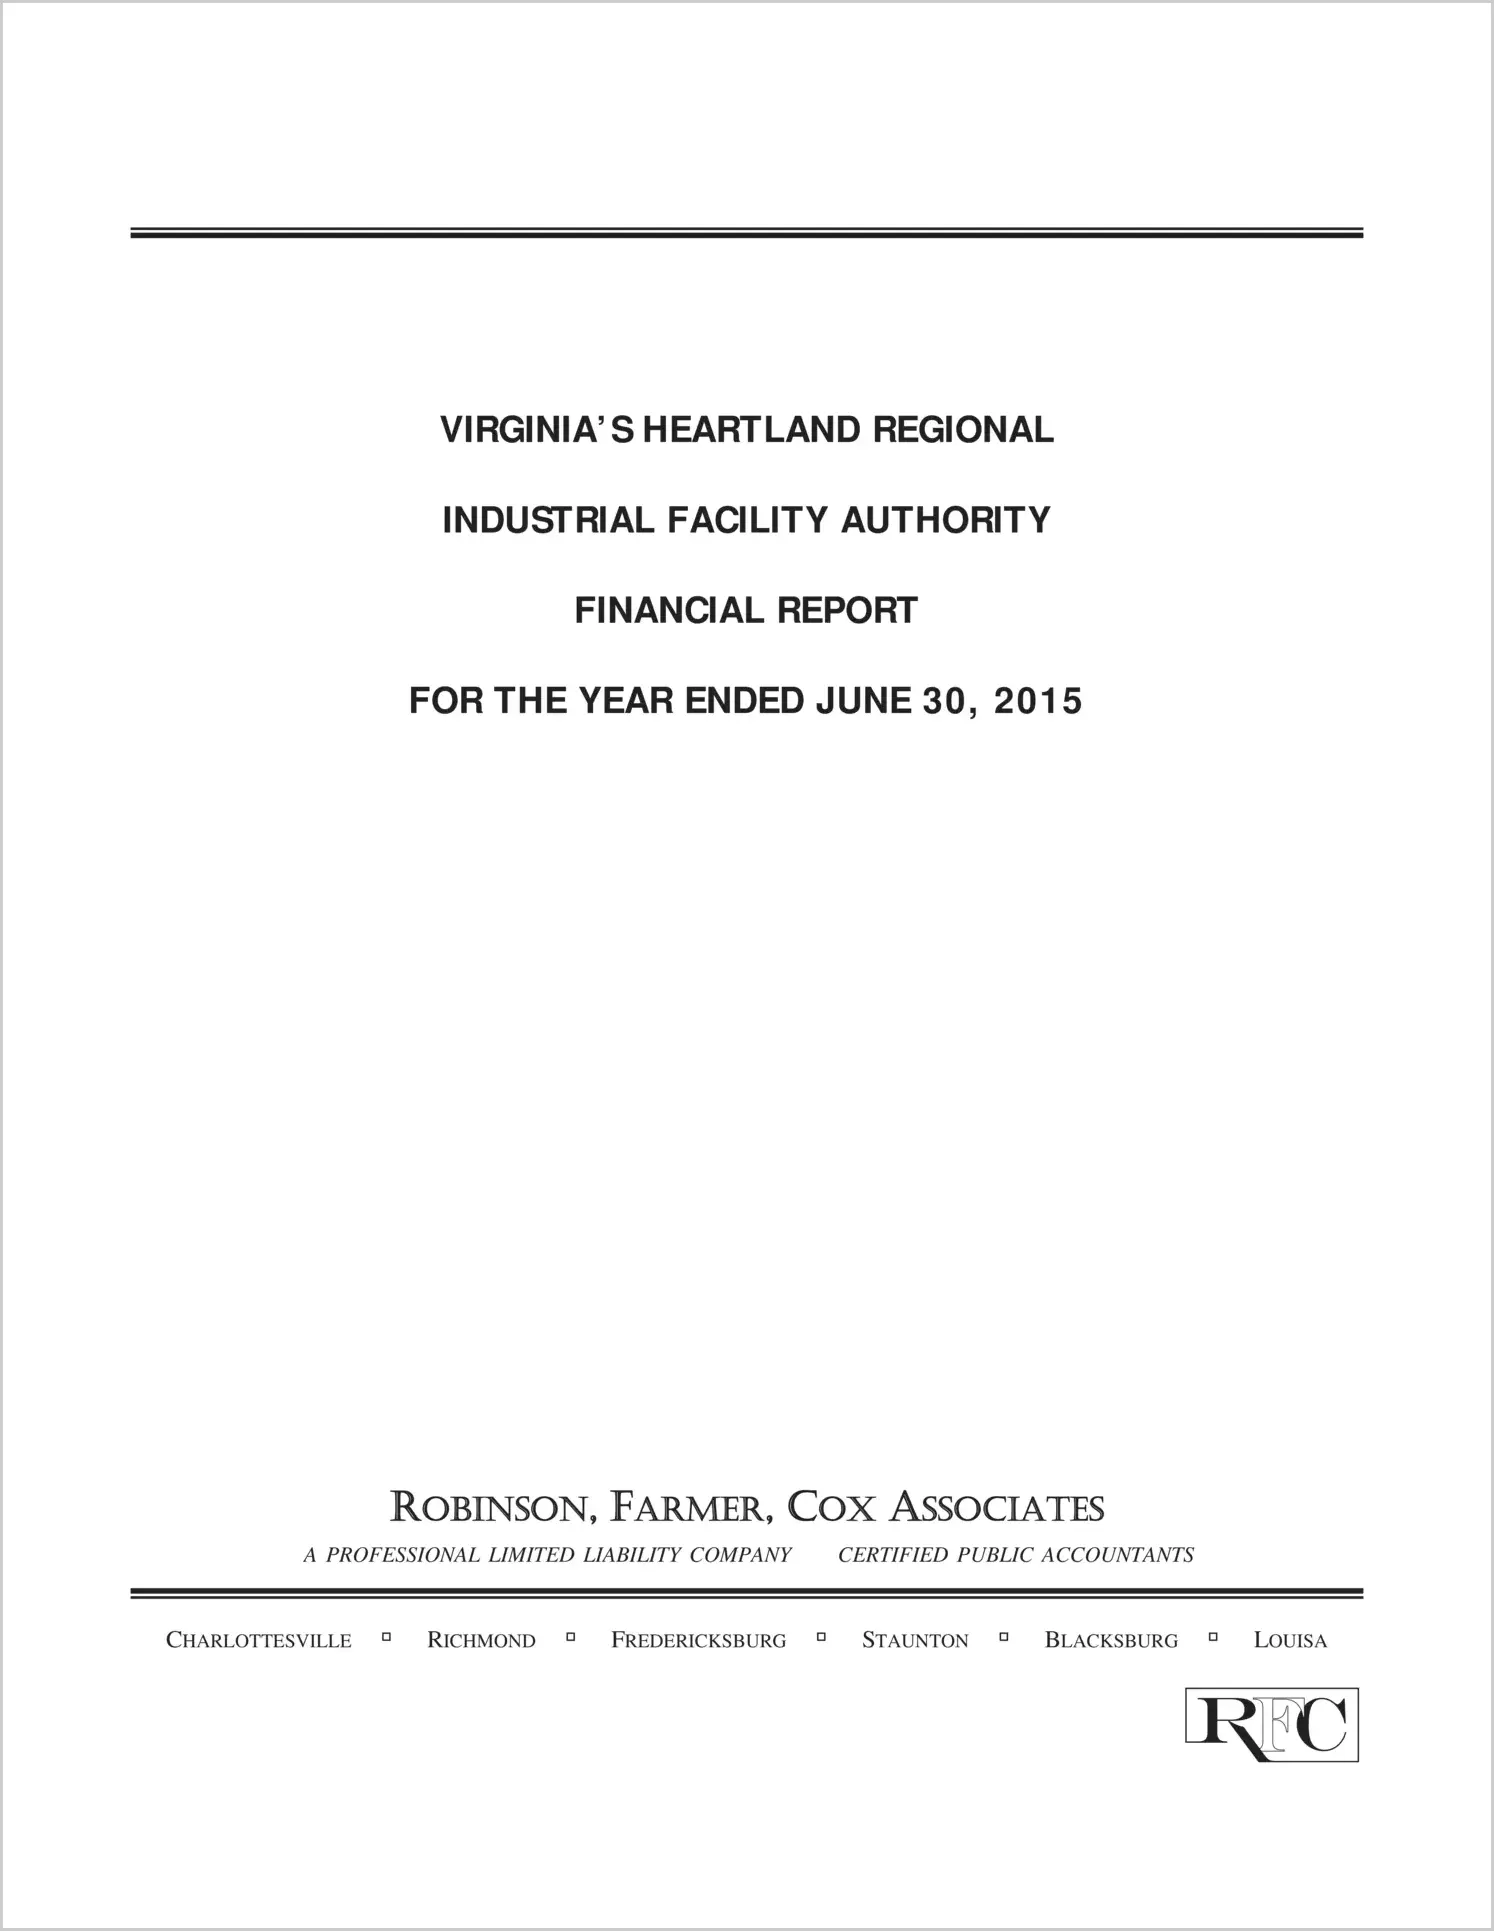 2015 Other Annual Financial Report for Virginia Heartland Regional Industrial Facility Authority